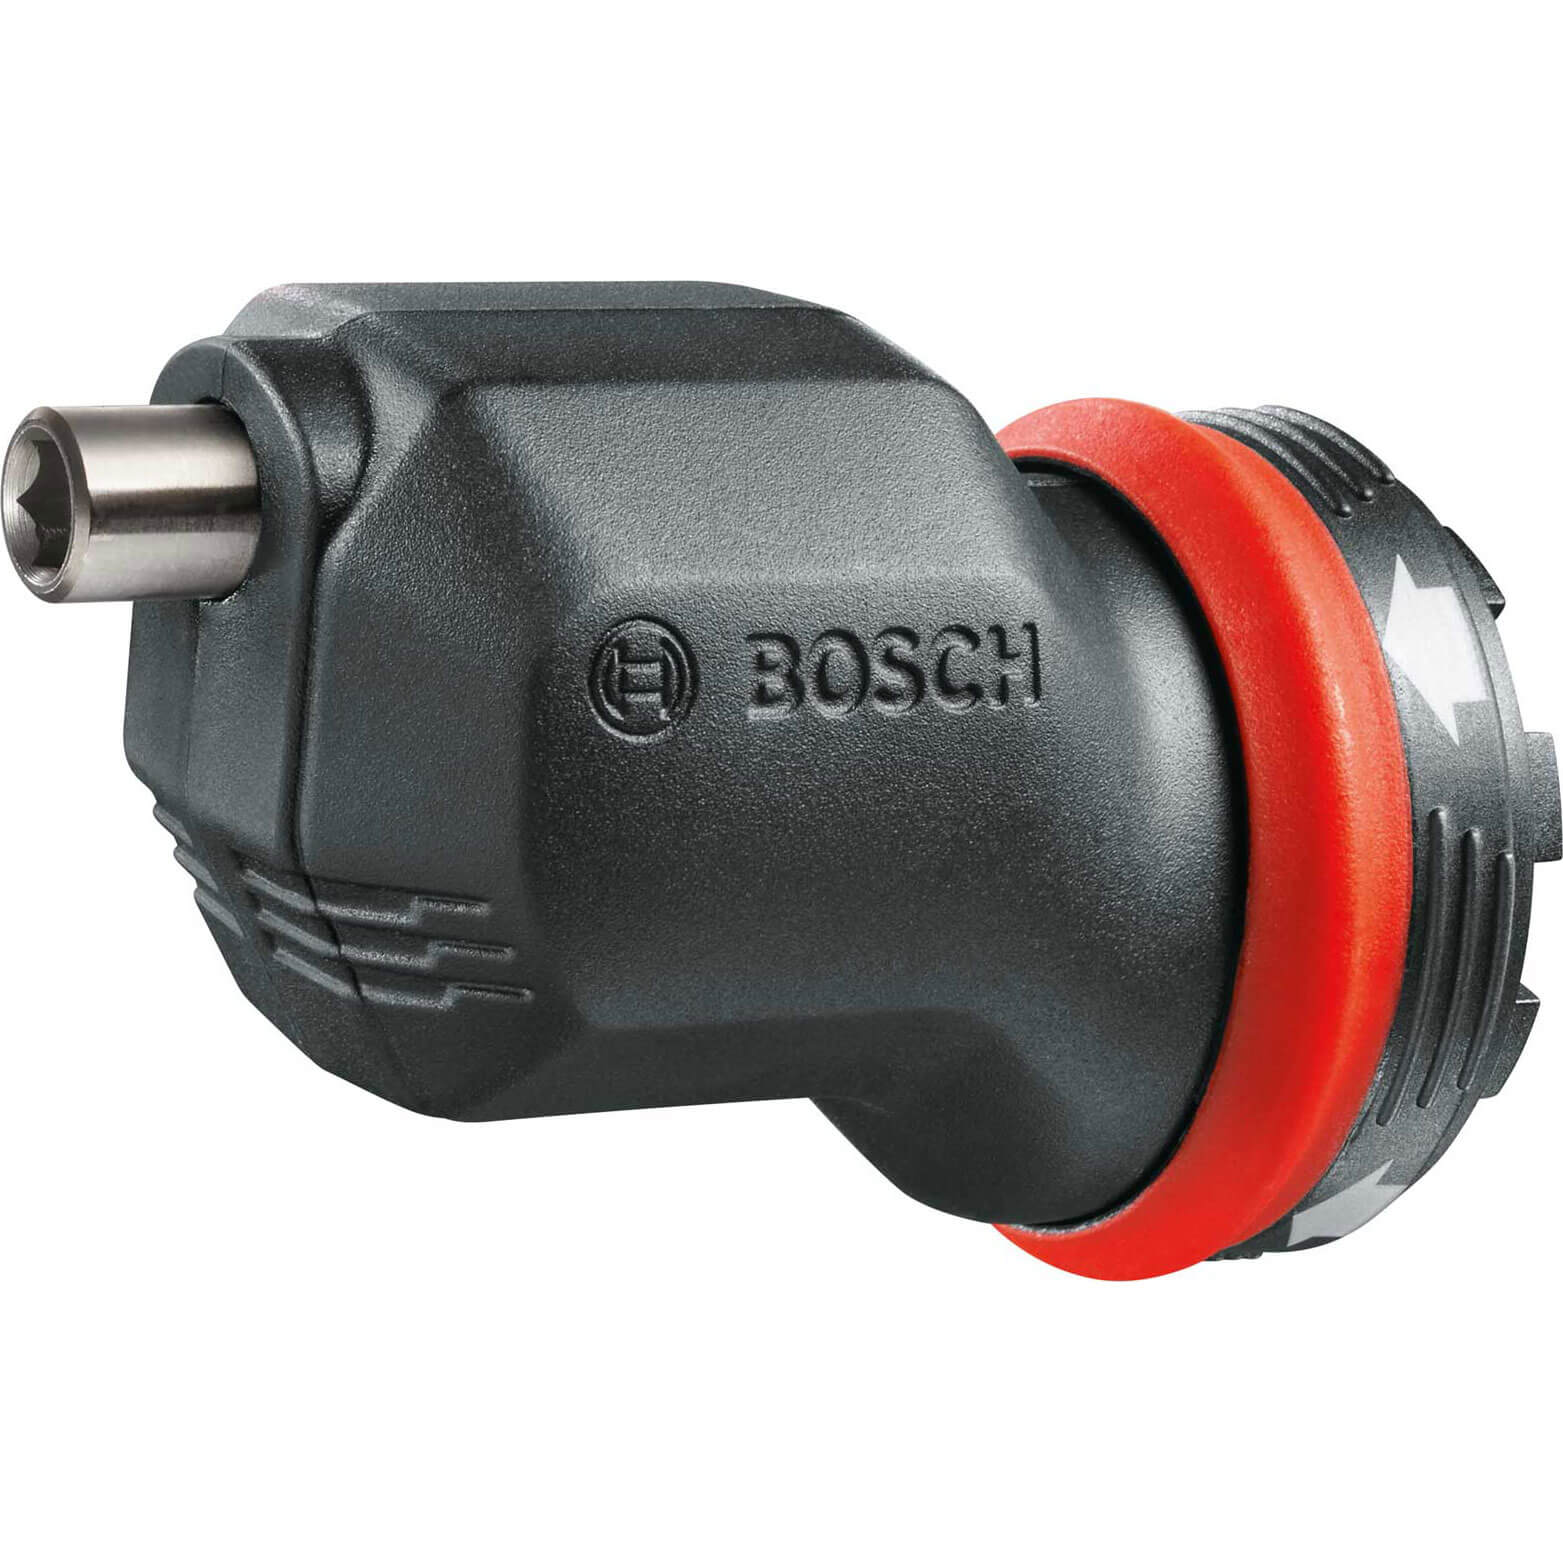 Image of Bosch Off Set Angled Screwdriver Adapter for ADVANCEDDRILL/IMPACT 18